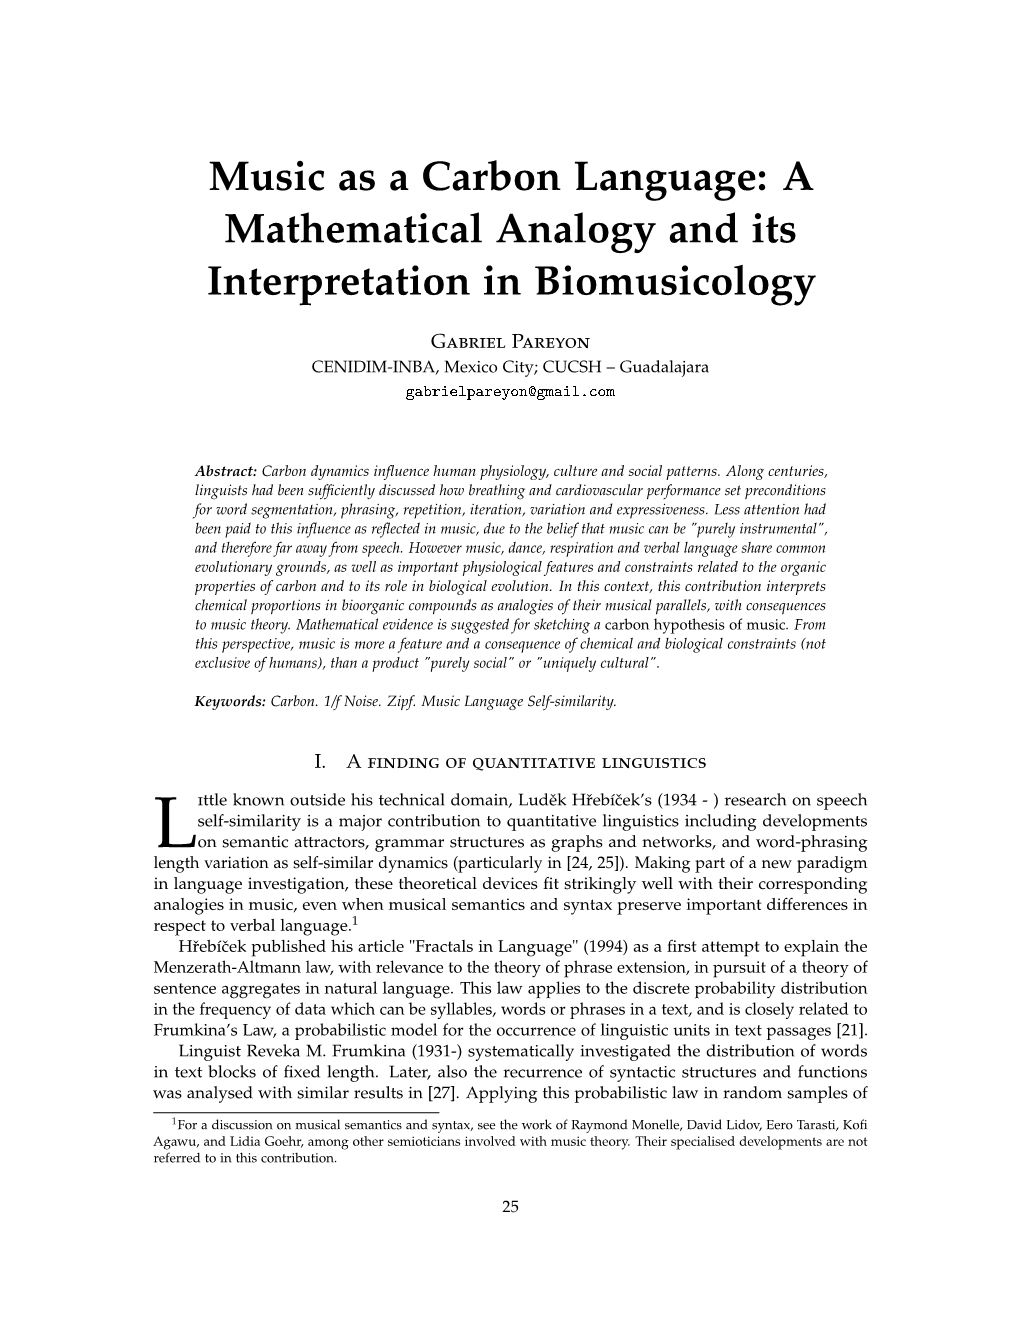 Music As a Carbon Language: a Mathematical Analogy and Its Interpretation in Biomusicology